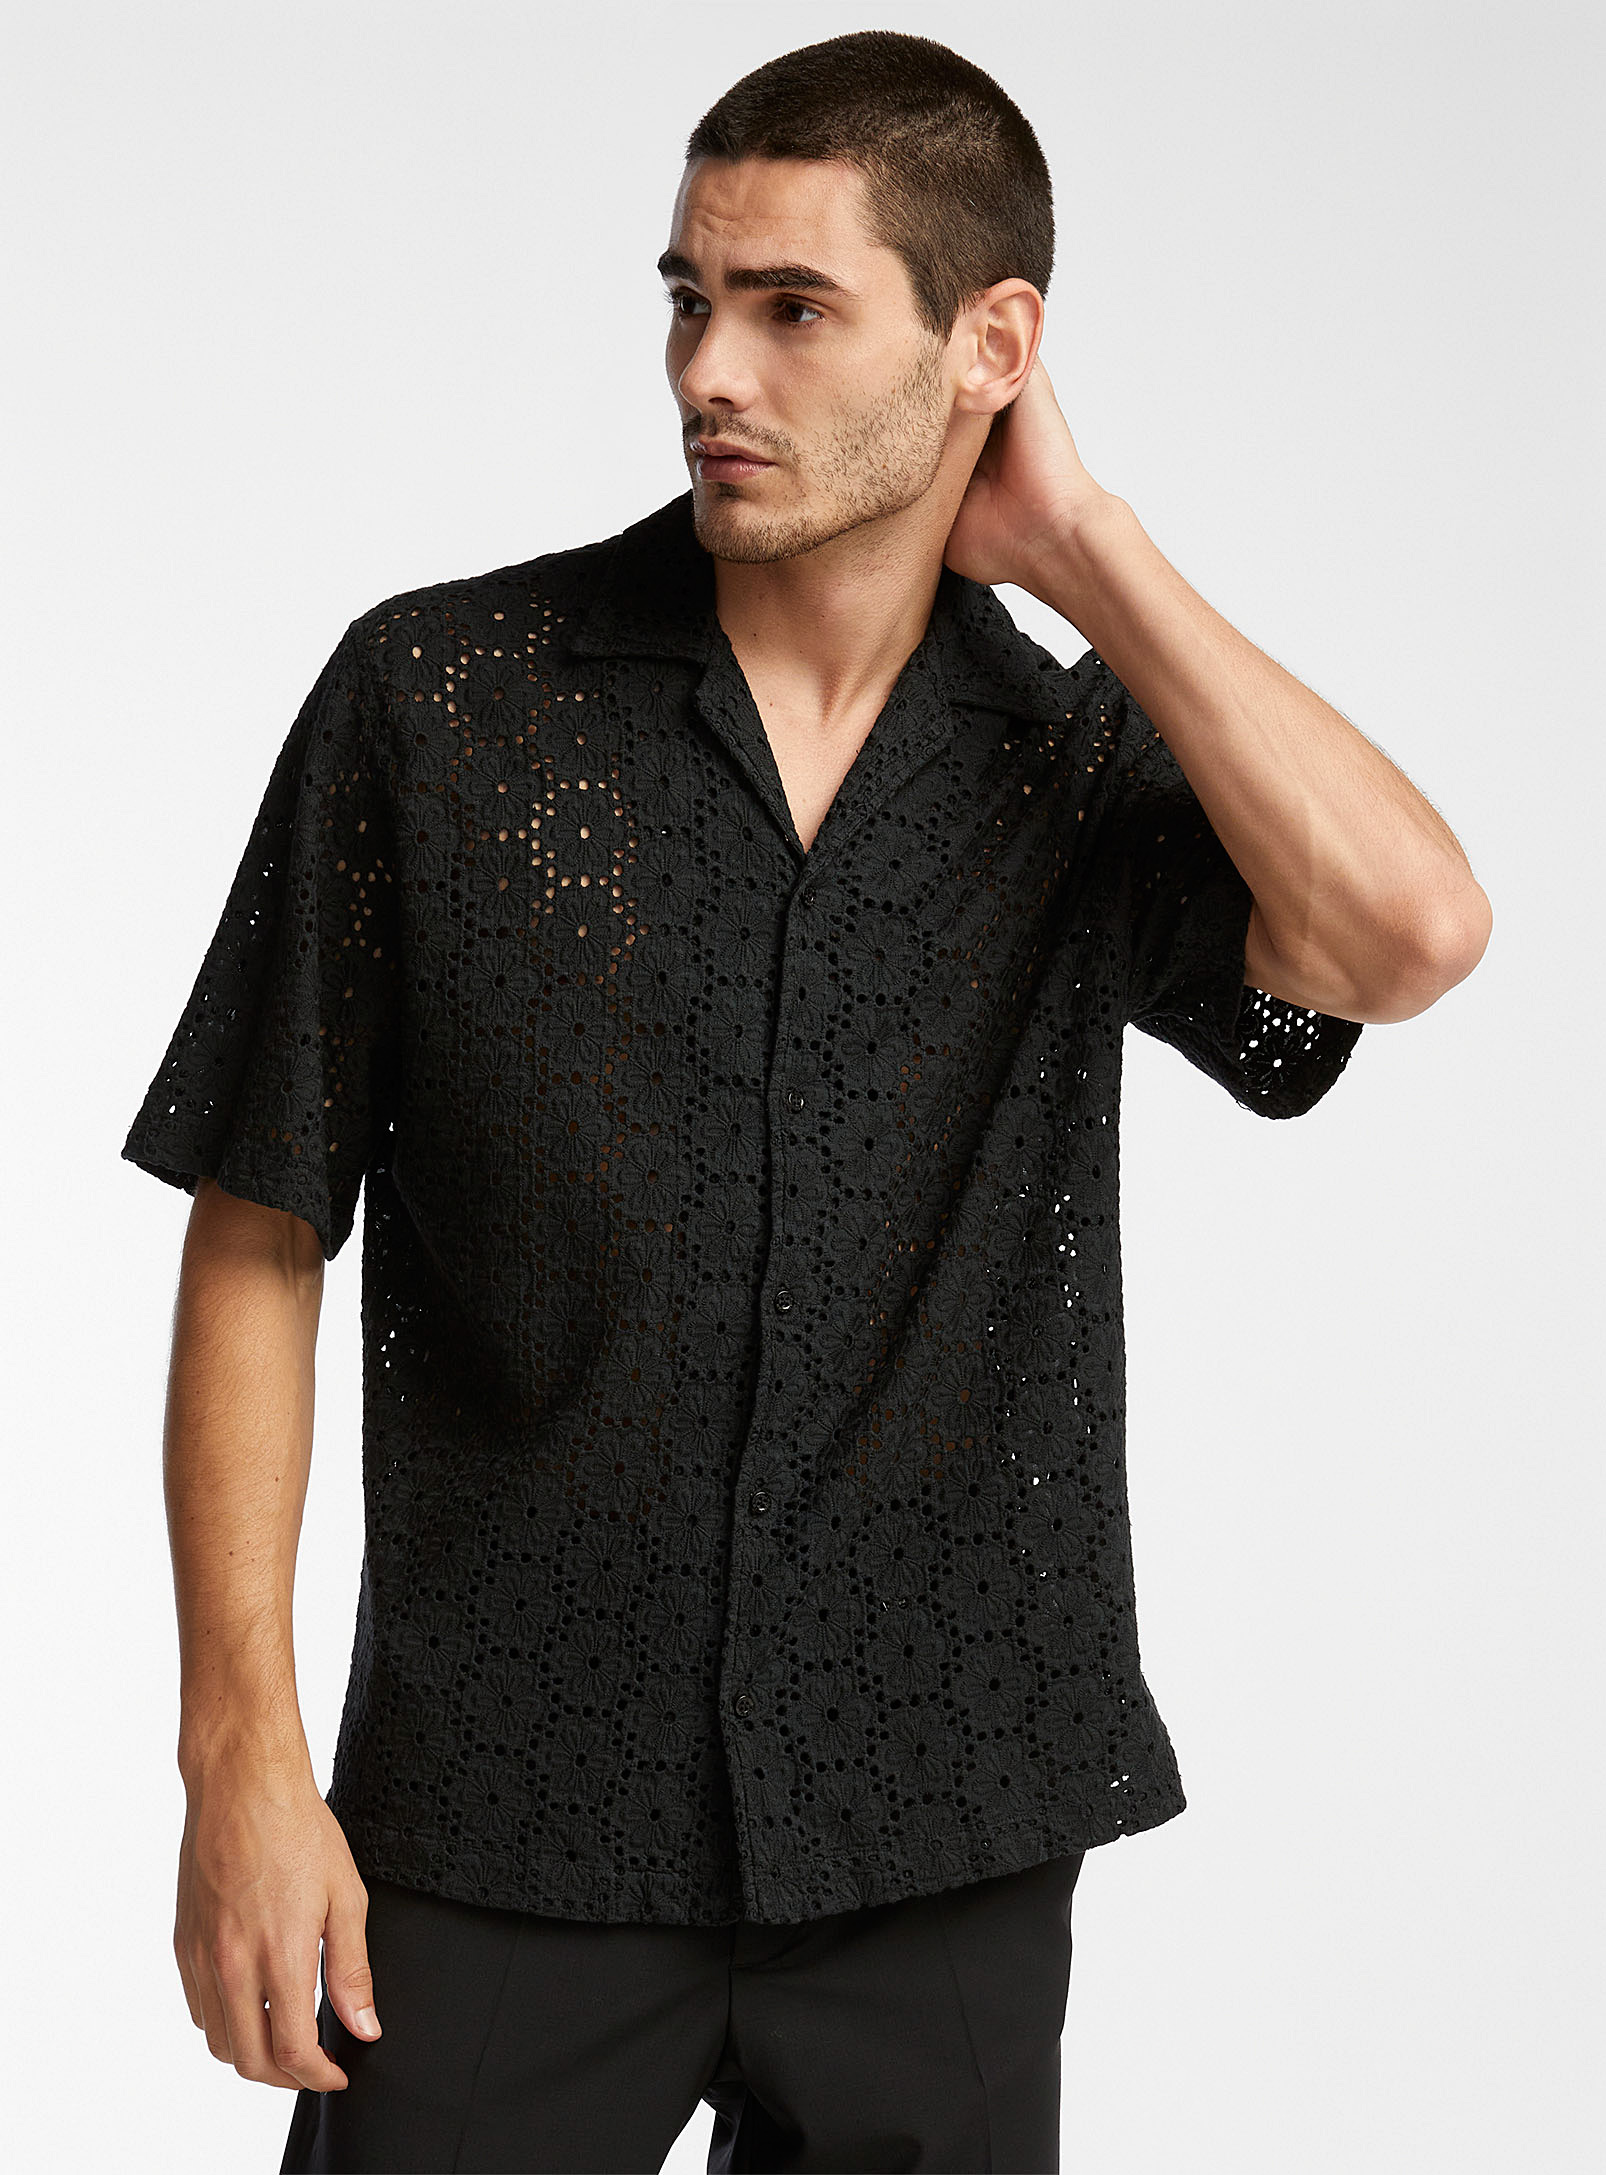 I'm Brian Floral Medallion Broderie Anglaise Shirt In Black